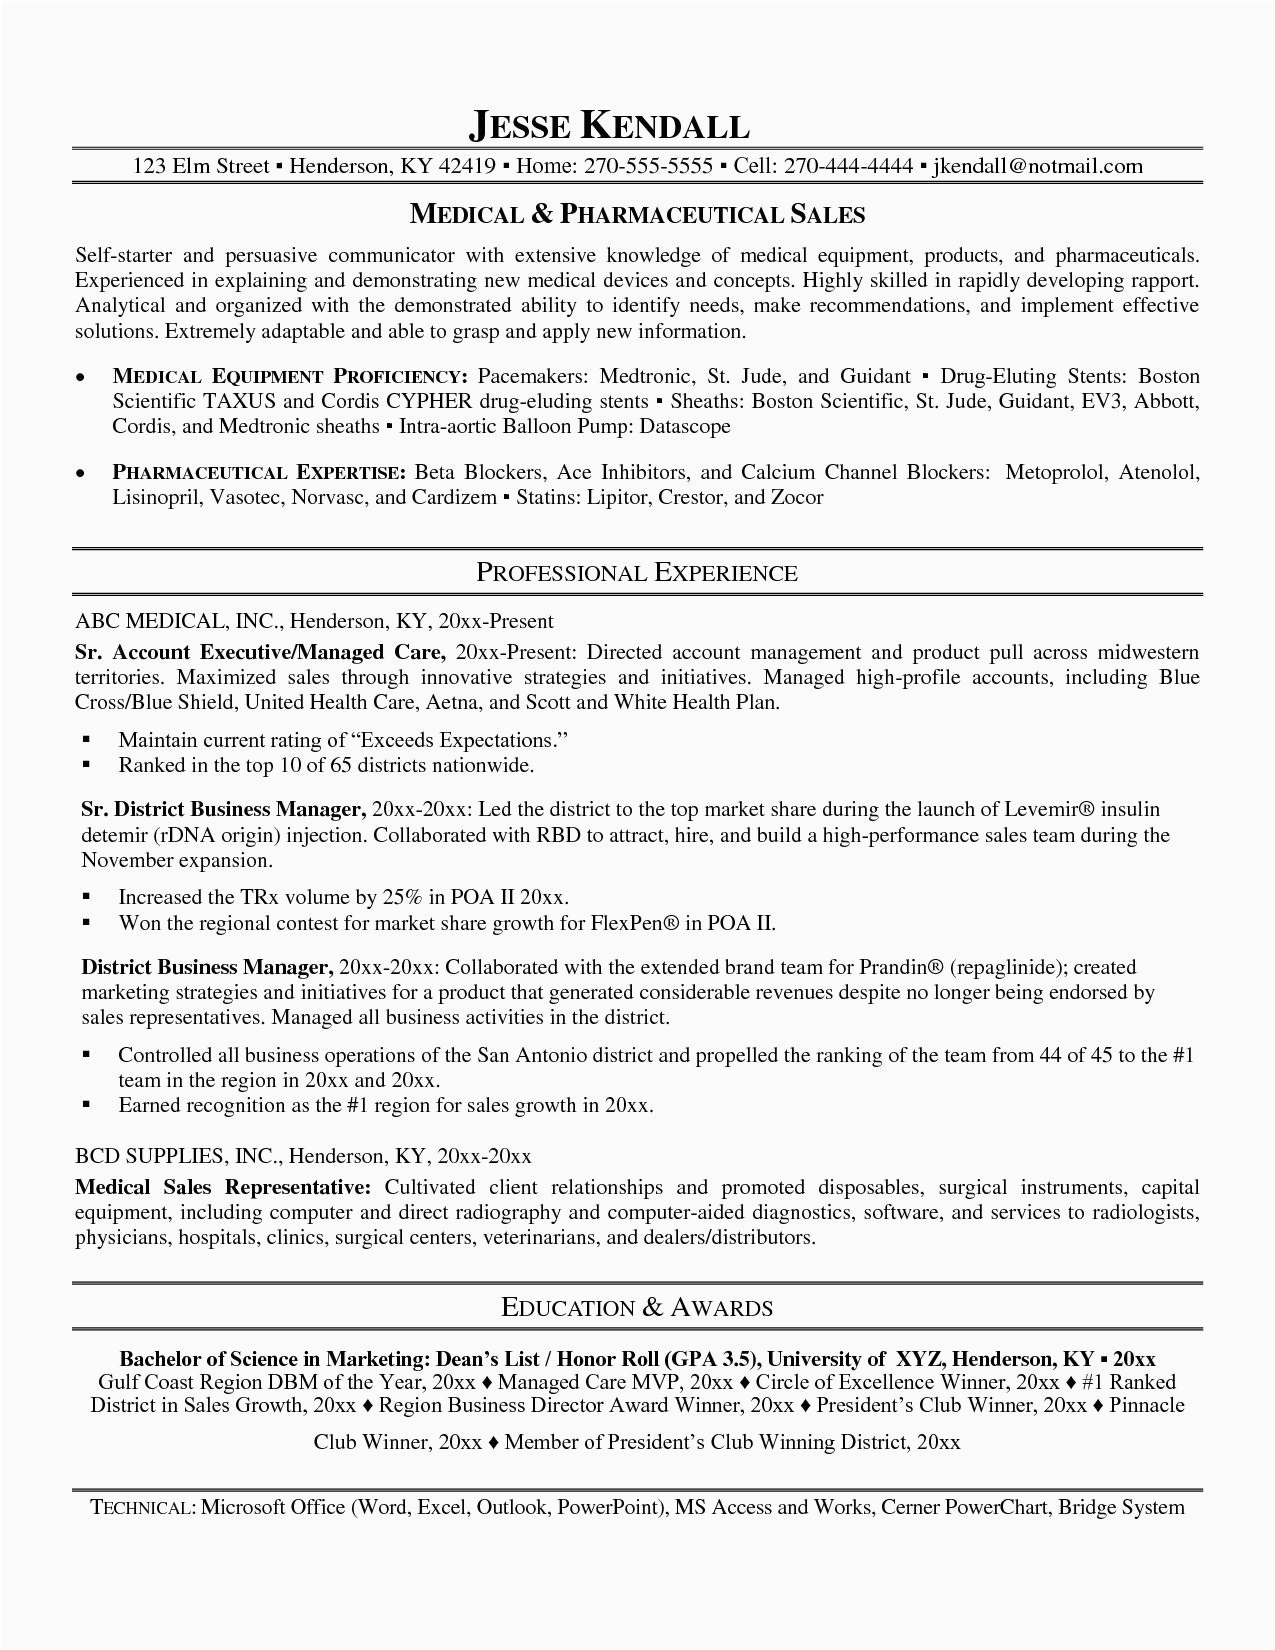 Sample Resume Objective Statements for Career Change Example Human Resources Career Change Resume Free Sample